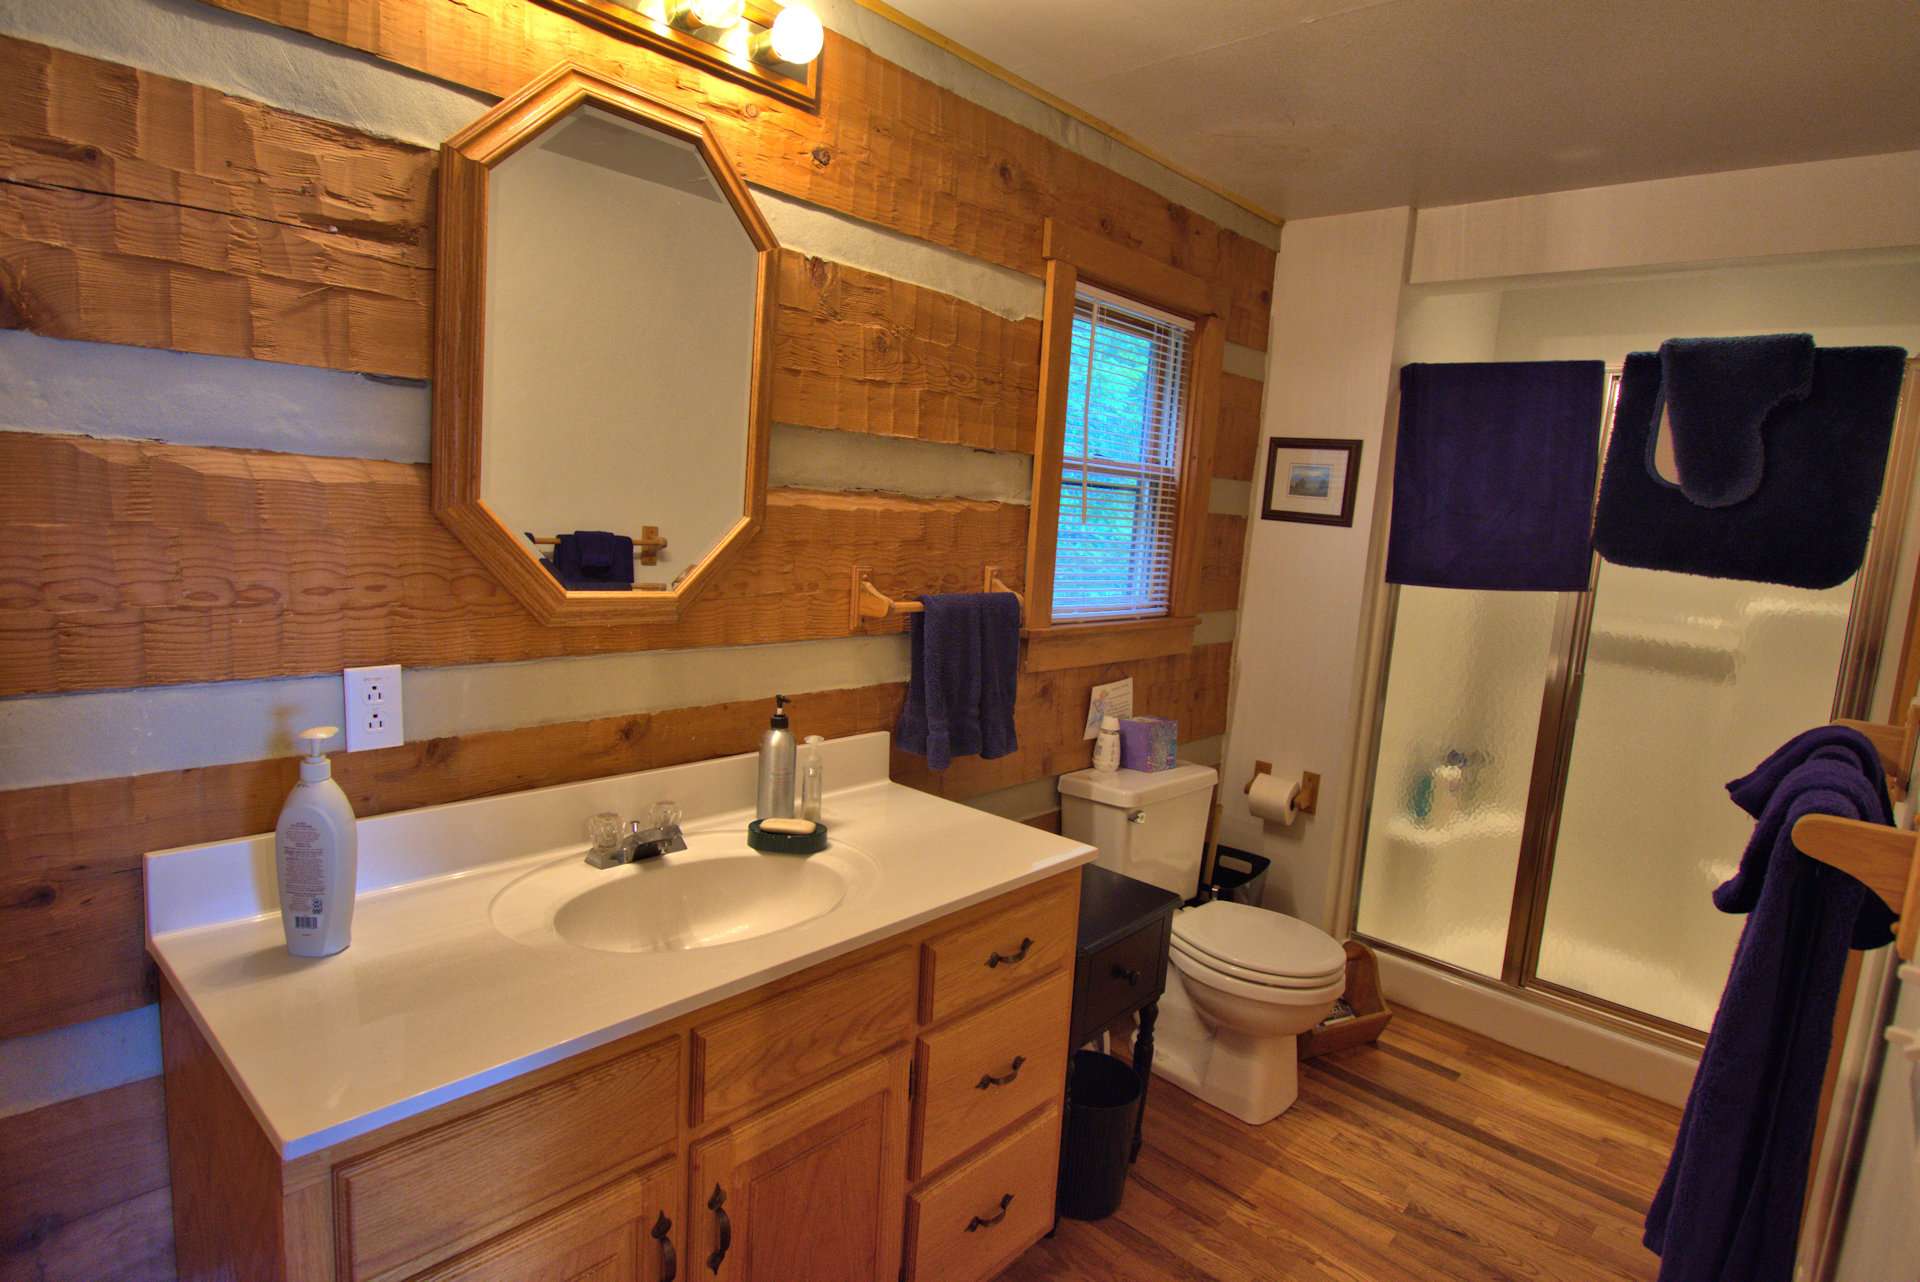 The main level also offers a full bath with walk-in shower.